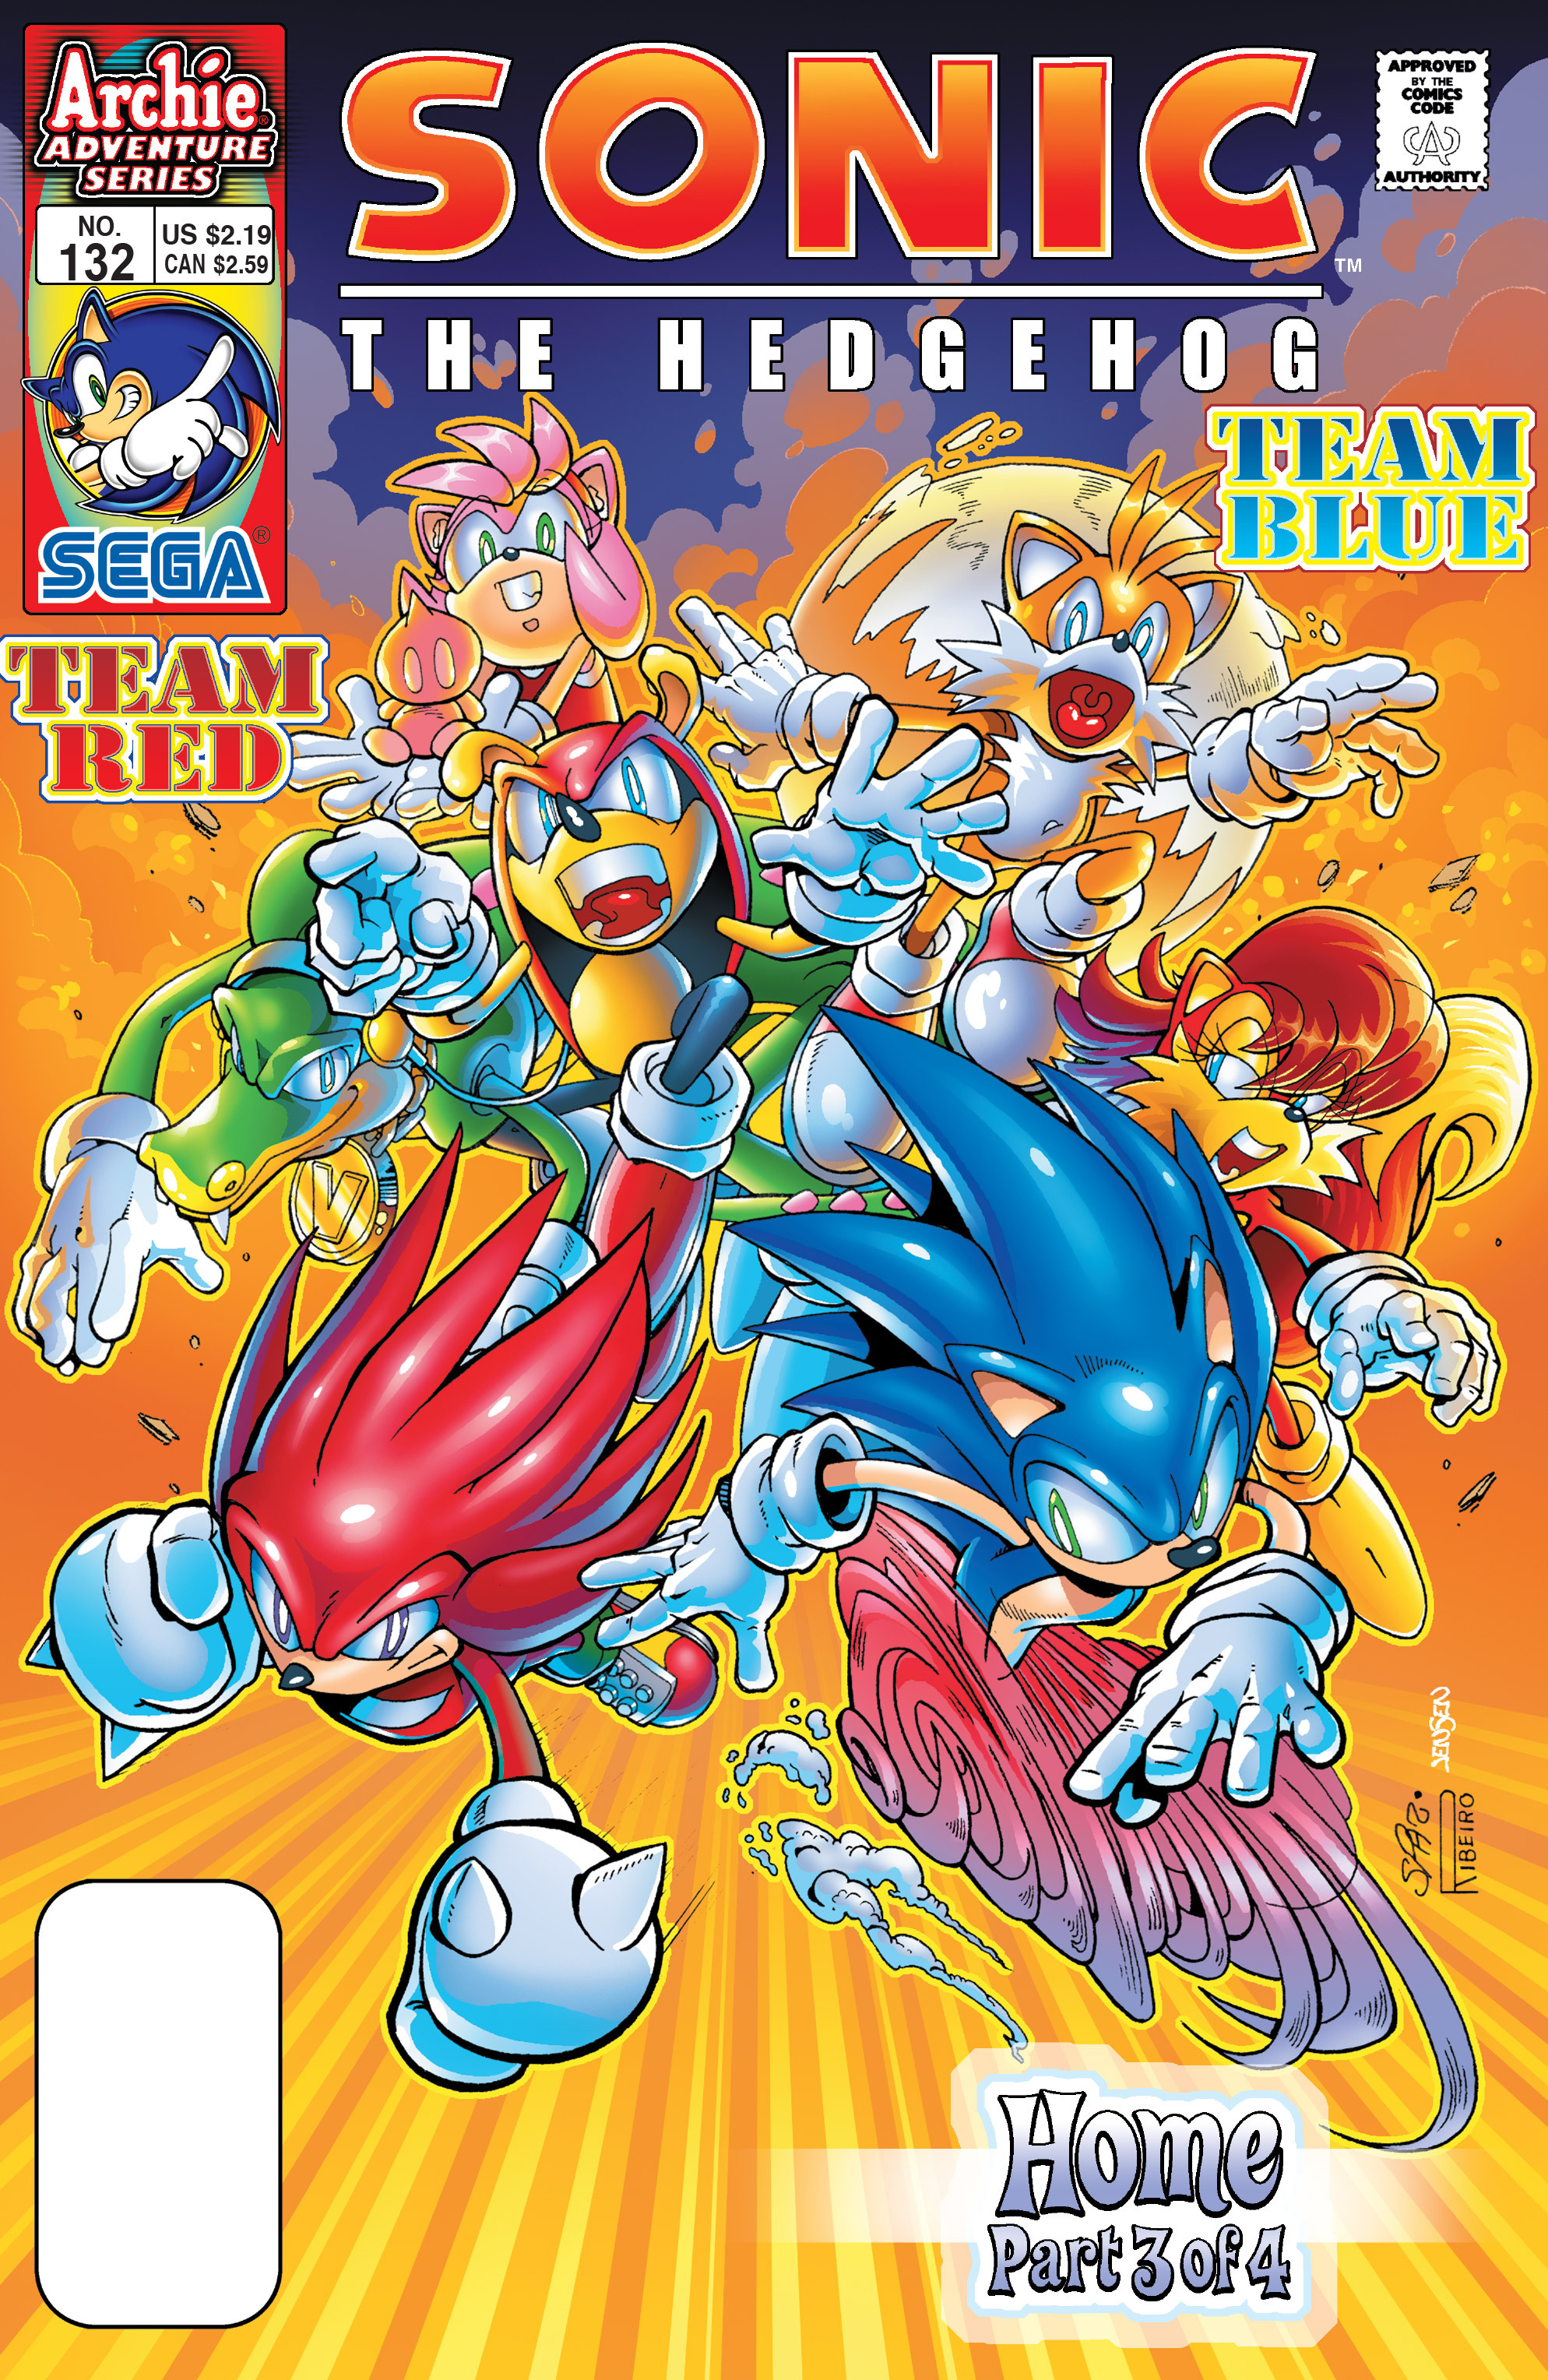 Archie Sonic the Hedgehog Issue 132 | Sonic News Network | Fandom powered by Wikia